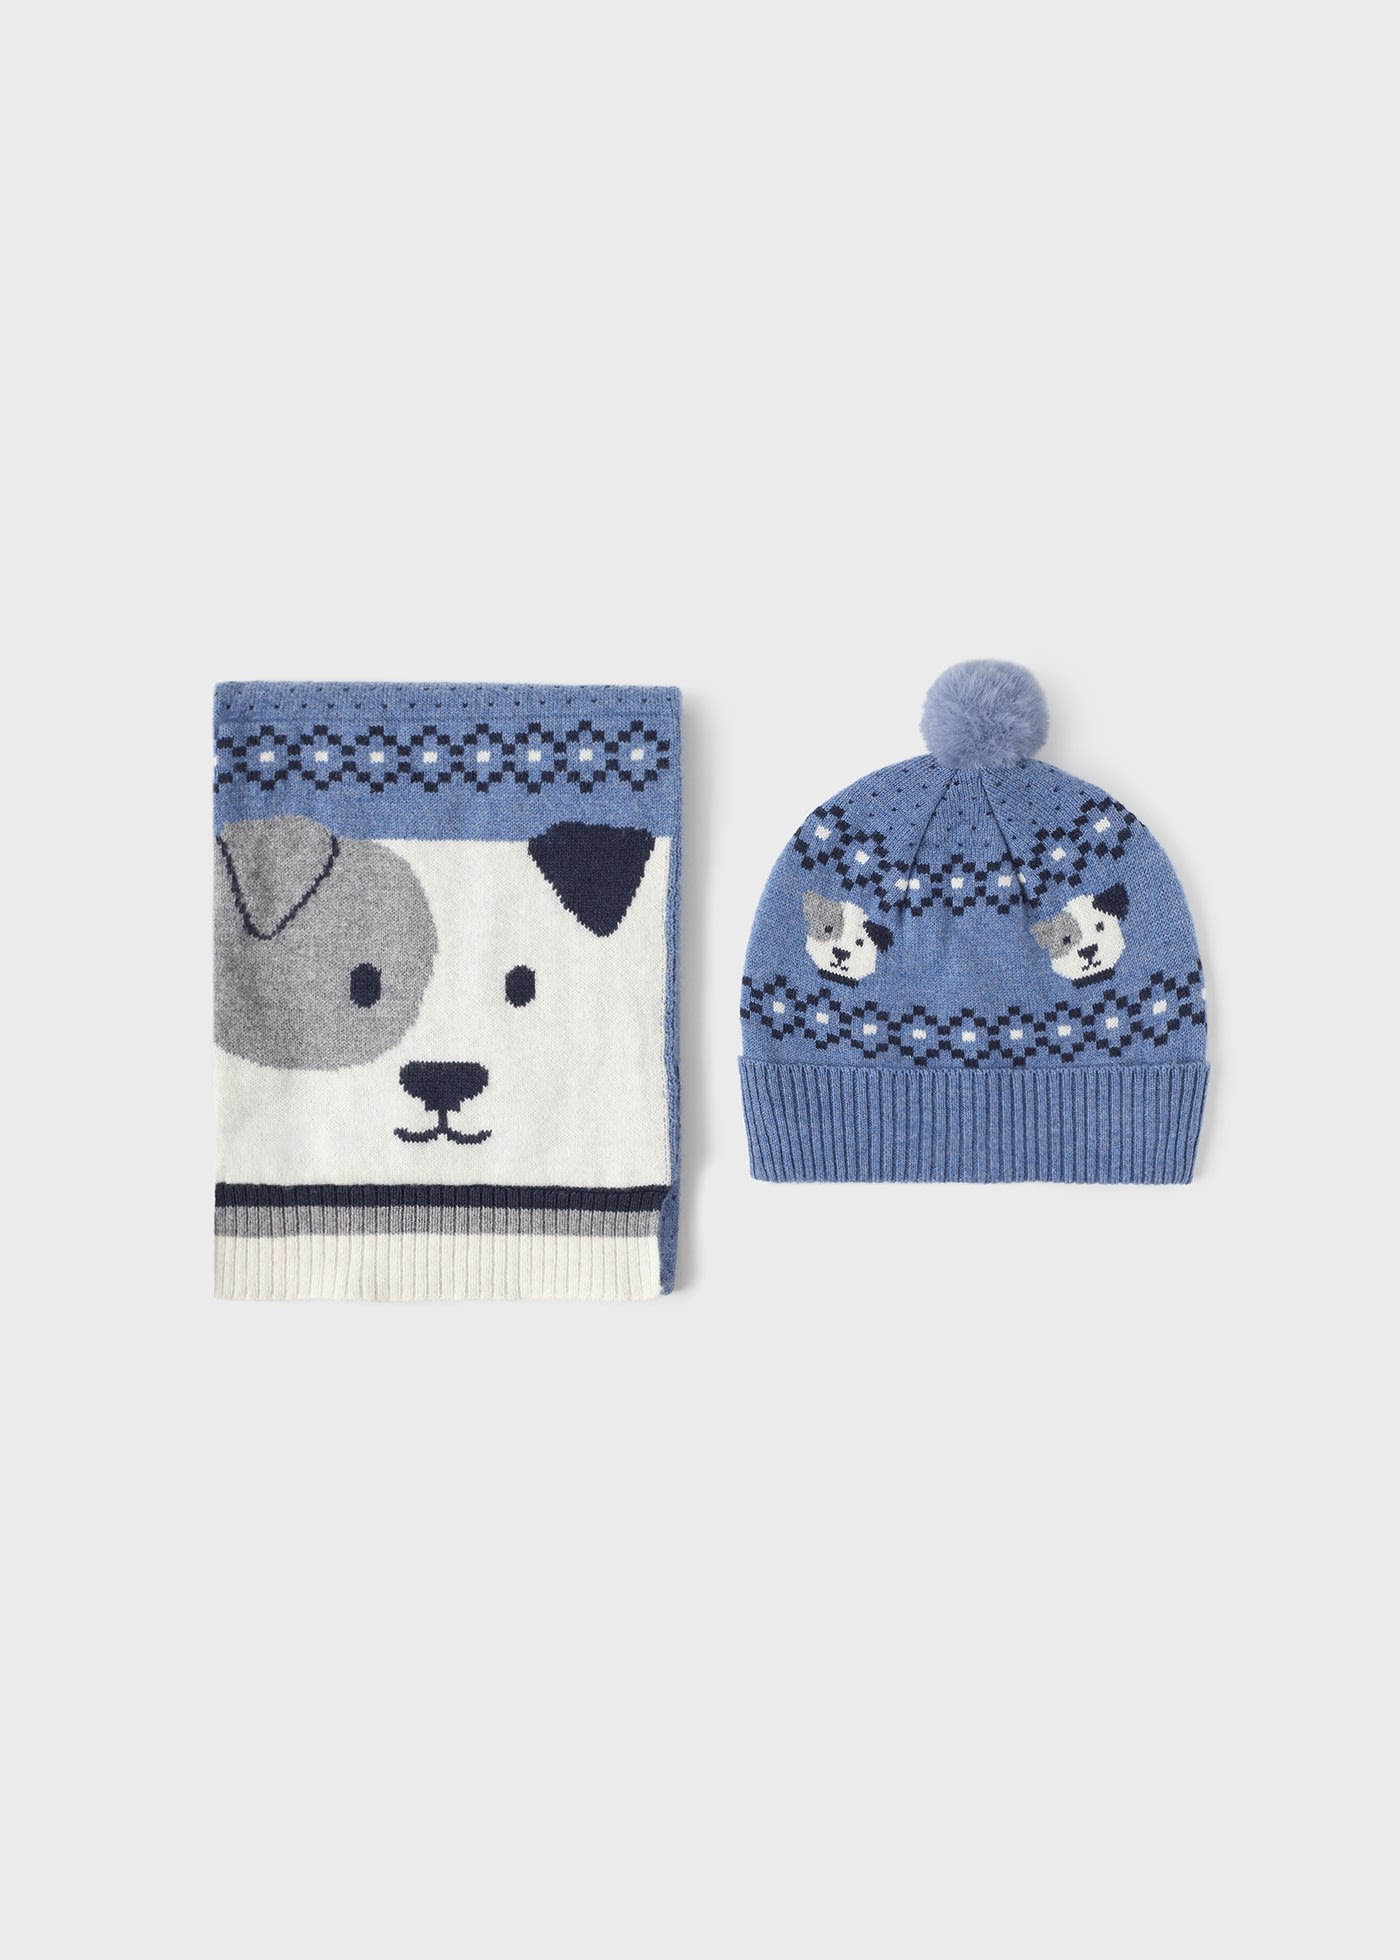 Baby hat and scarf set